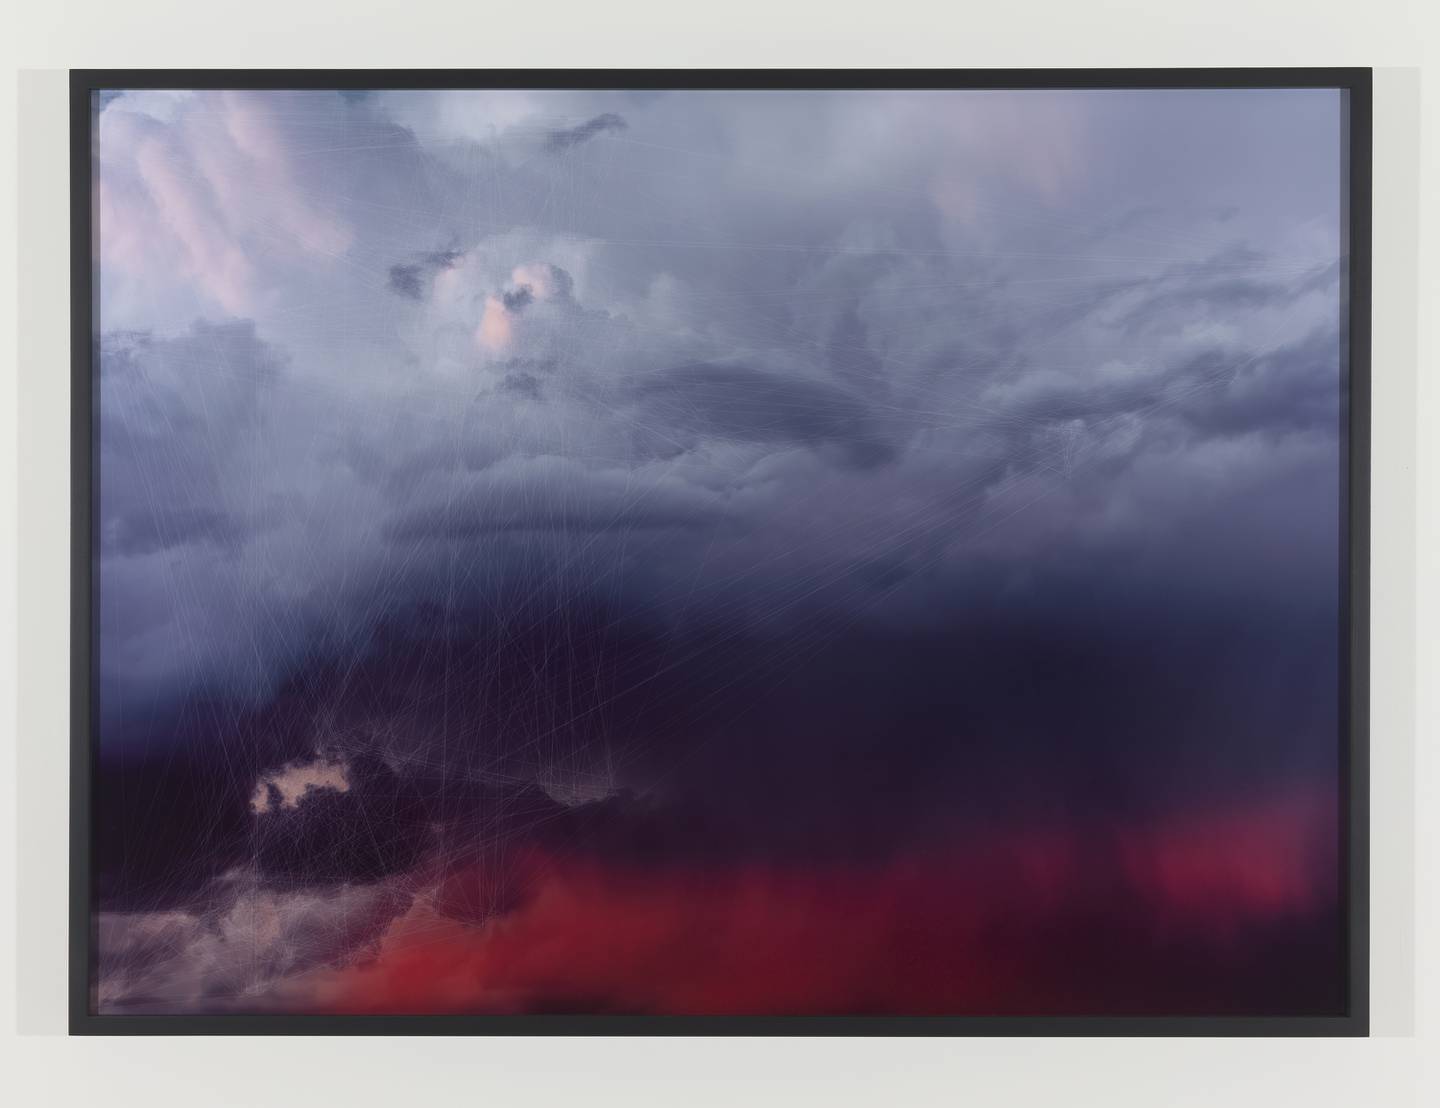 'Cloud #135 Hough Lines' by Trevor Paglen (2019). Photo: Trevor Paglen / Pace Gallery